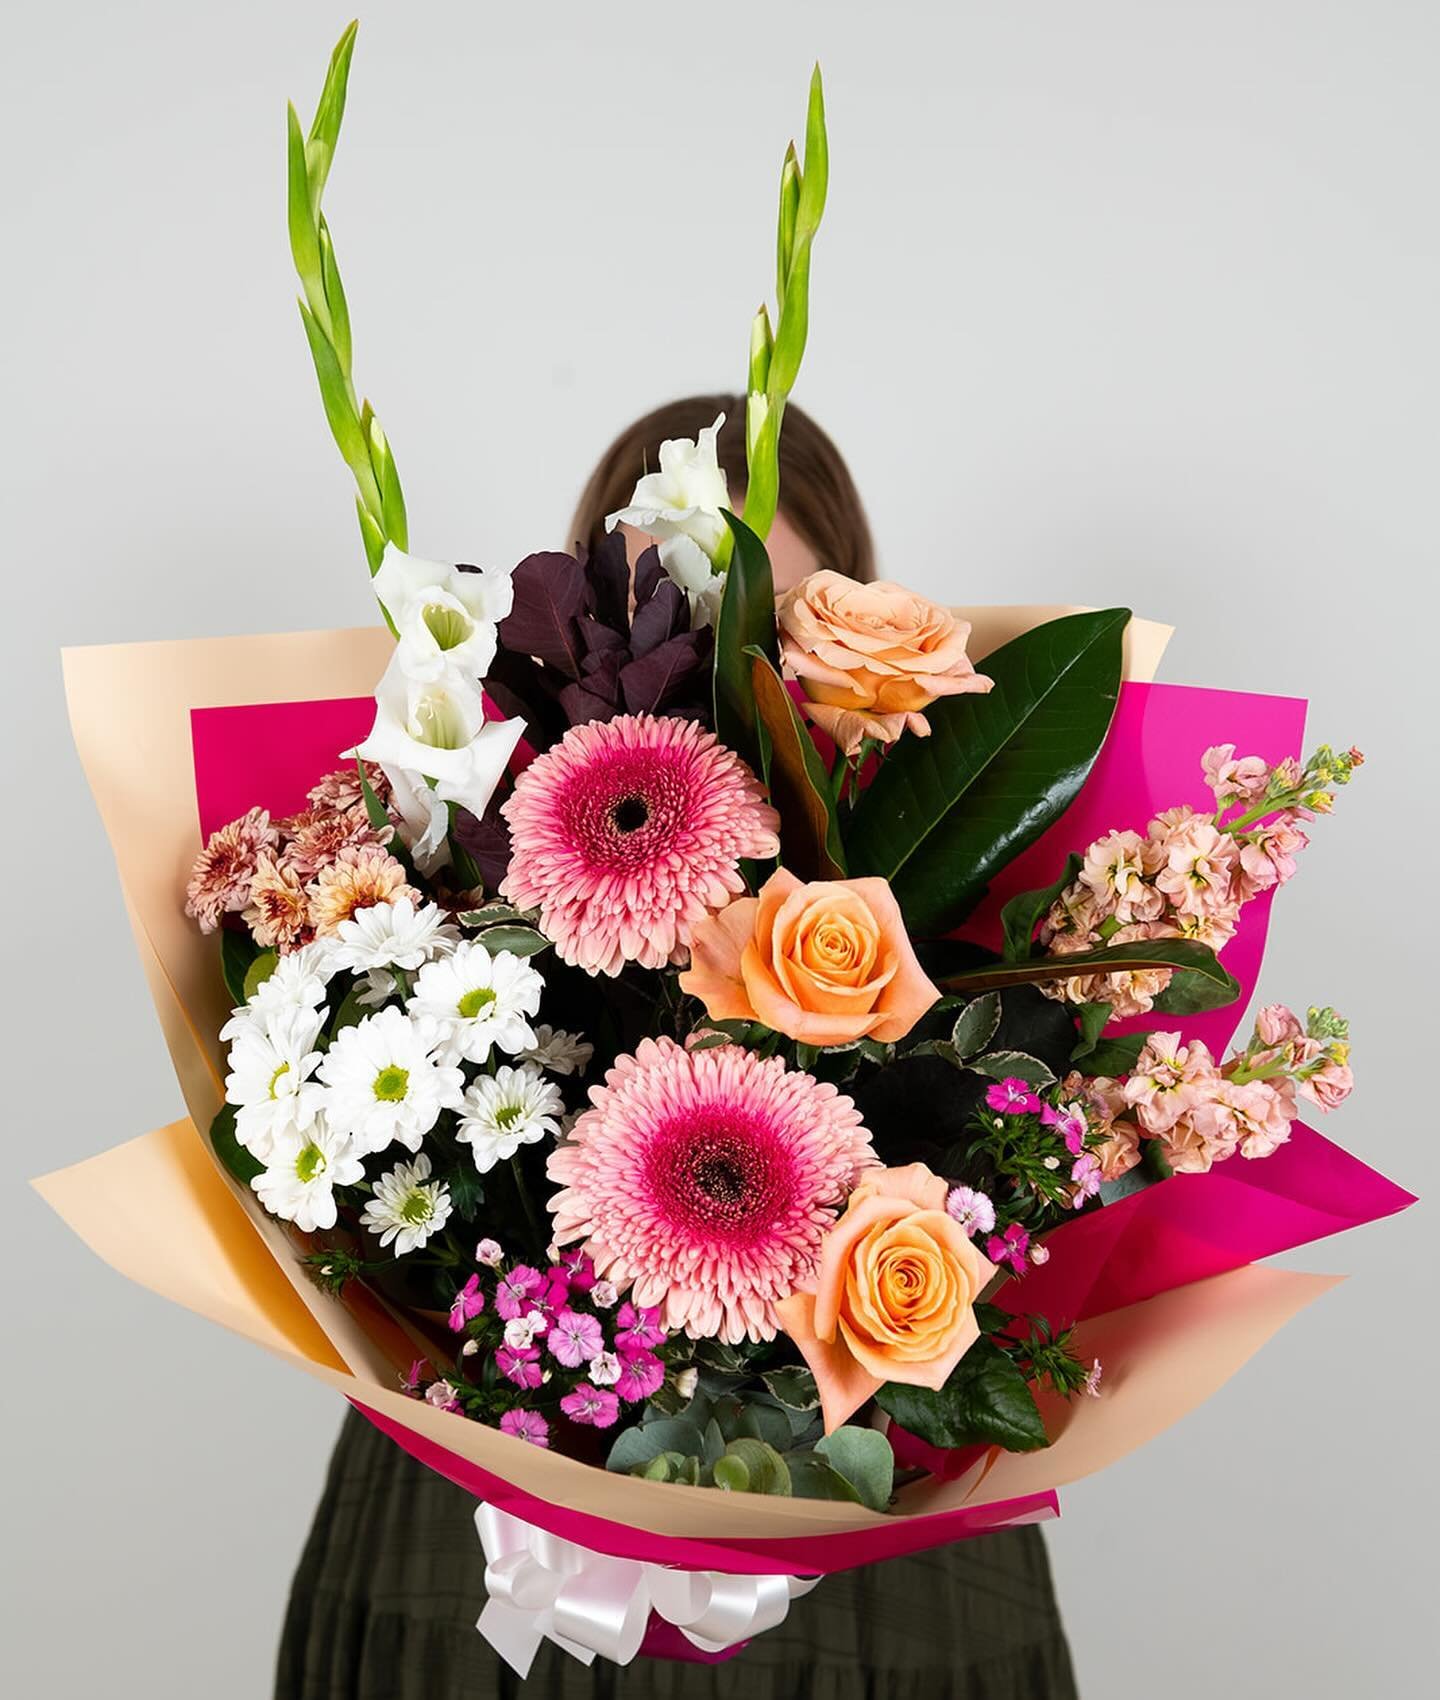 We&rsquo;ve saved the best until last !
Spoil Mum with a Rianna - Deluxe Bouquet 🌸💕

Named after our Boss Lady herself, Rianna is a stunning, large, fragrant, mixed bunch full of Premium, Seasonal Blooms in Pinks, Peach and White Tones. Gladioli, S